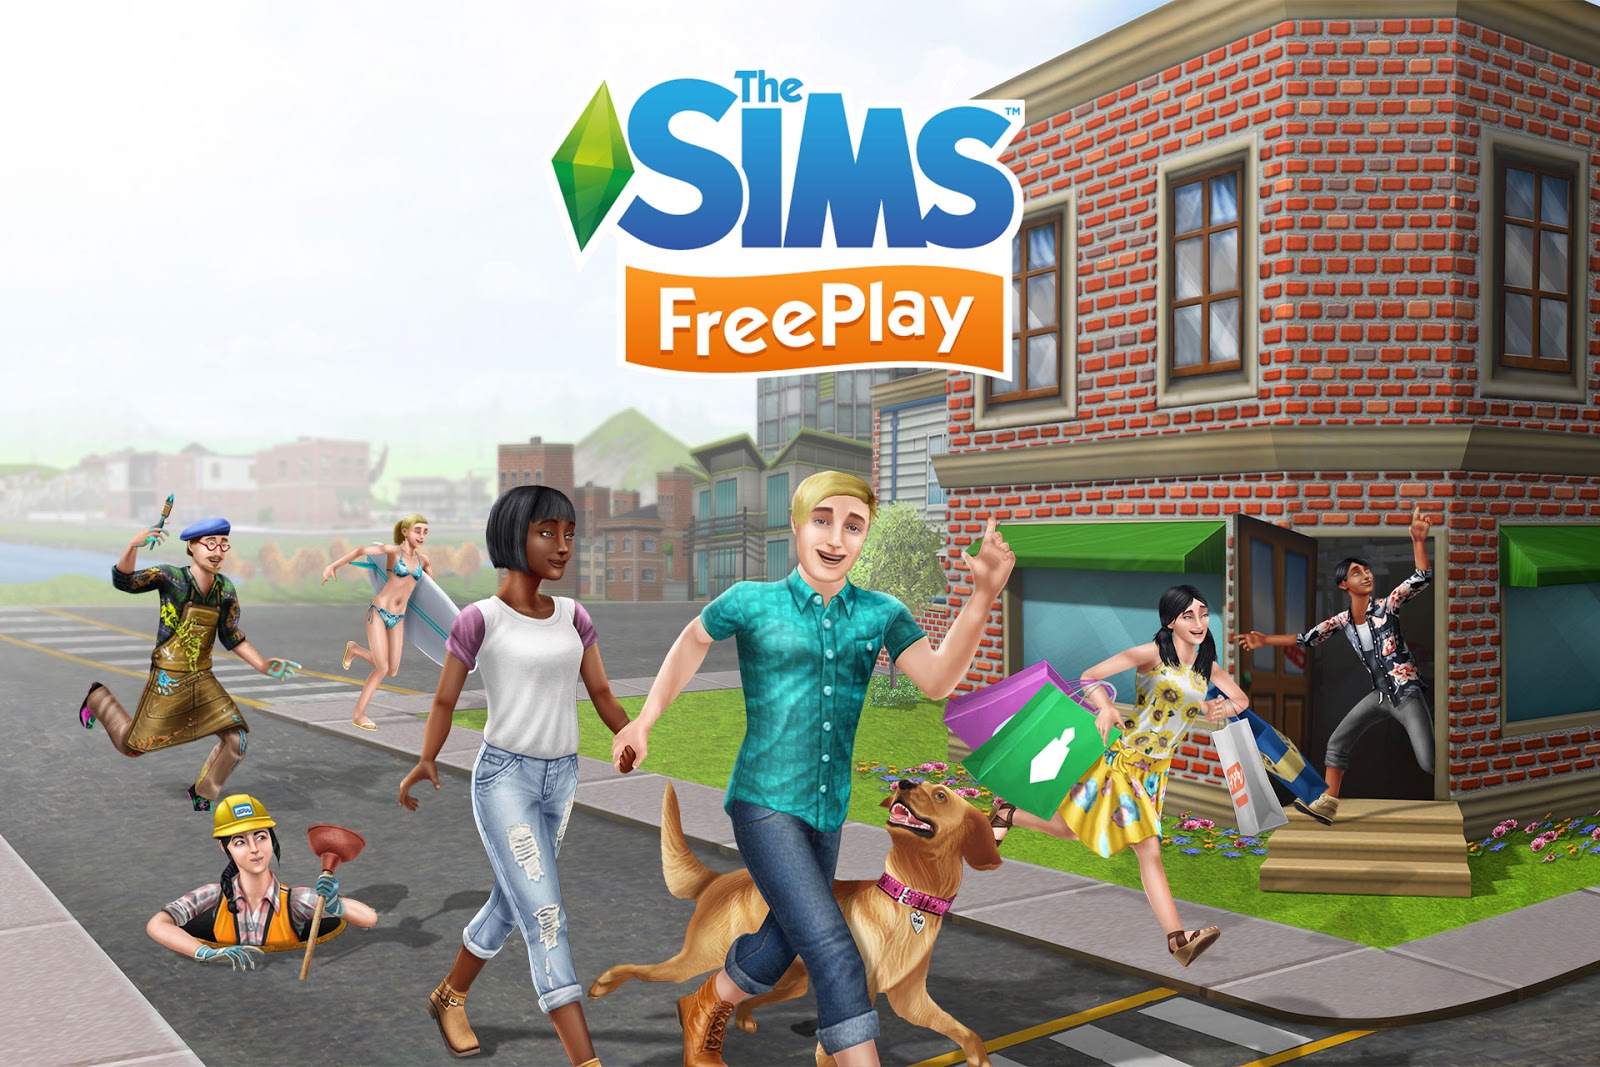 [TRICK] The Sims Freeplay Cheats Unlimited Money & {2021} is on StageIt